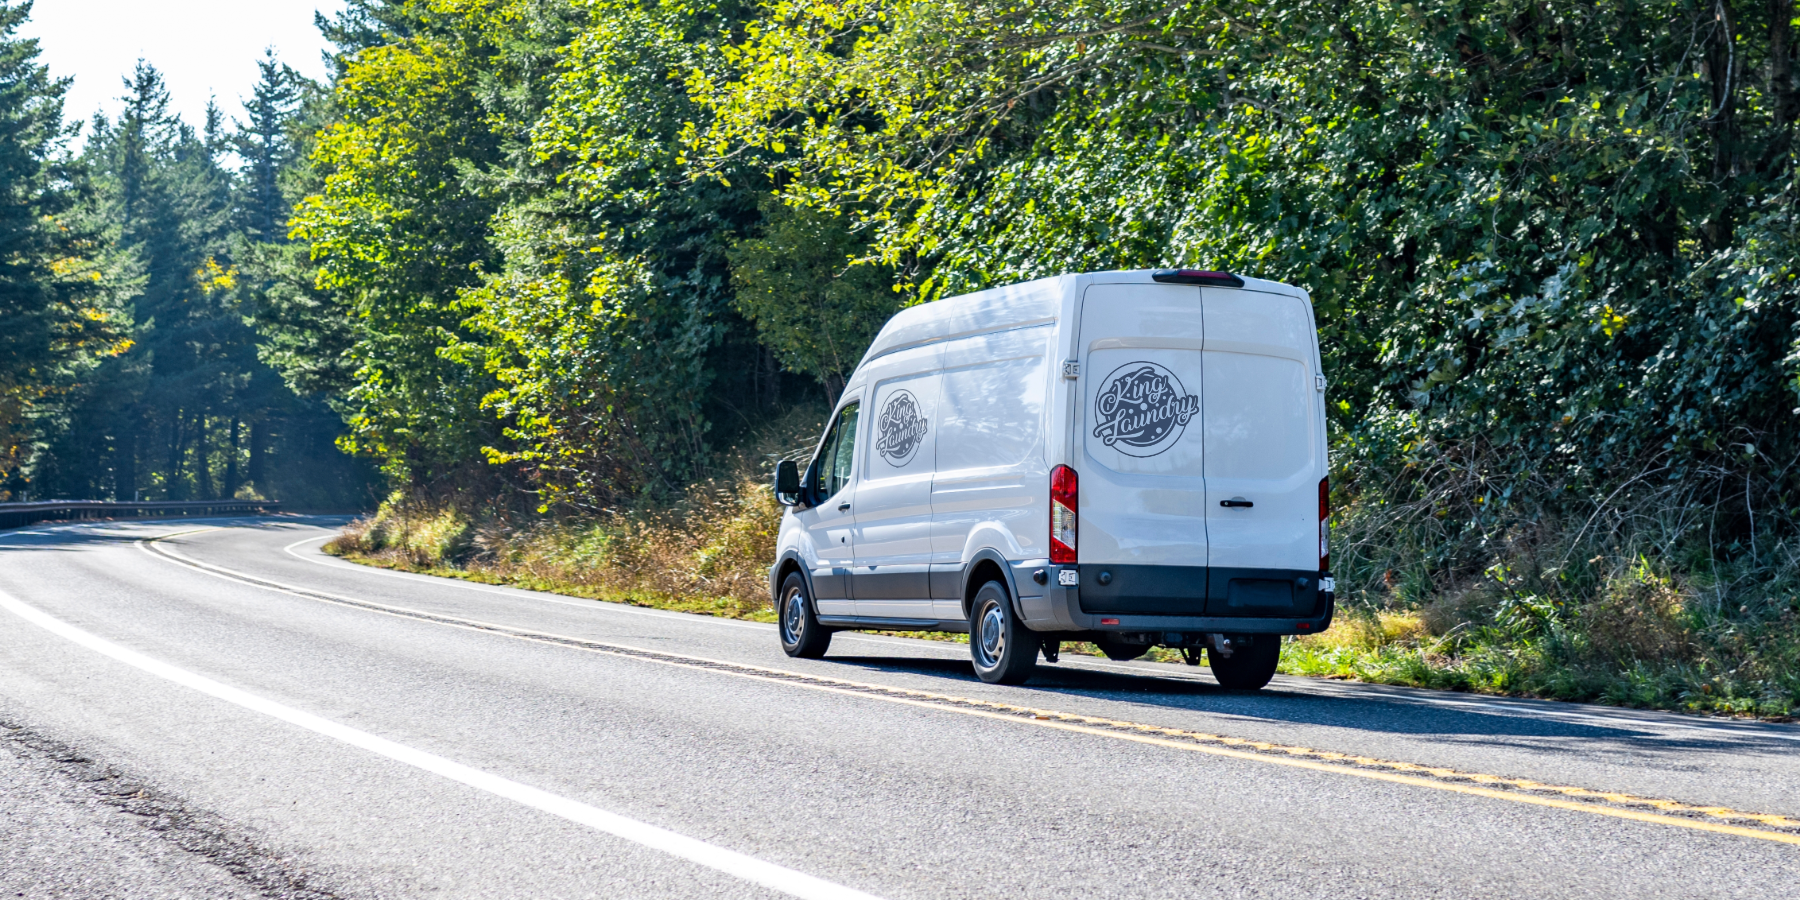 King Laundry delivery van traveling down the open road.